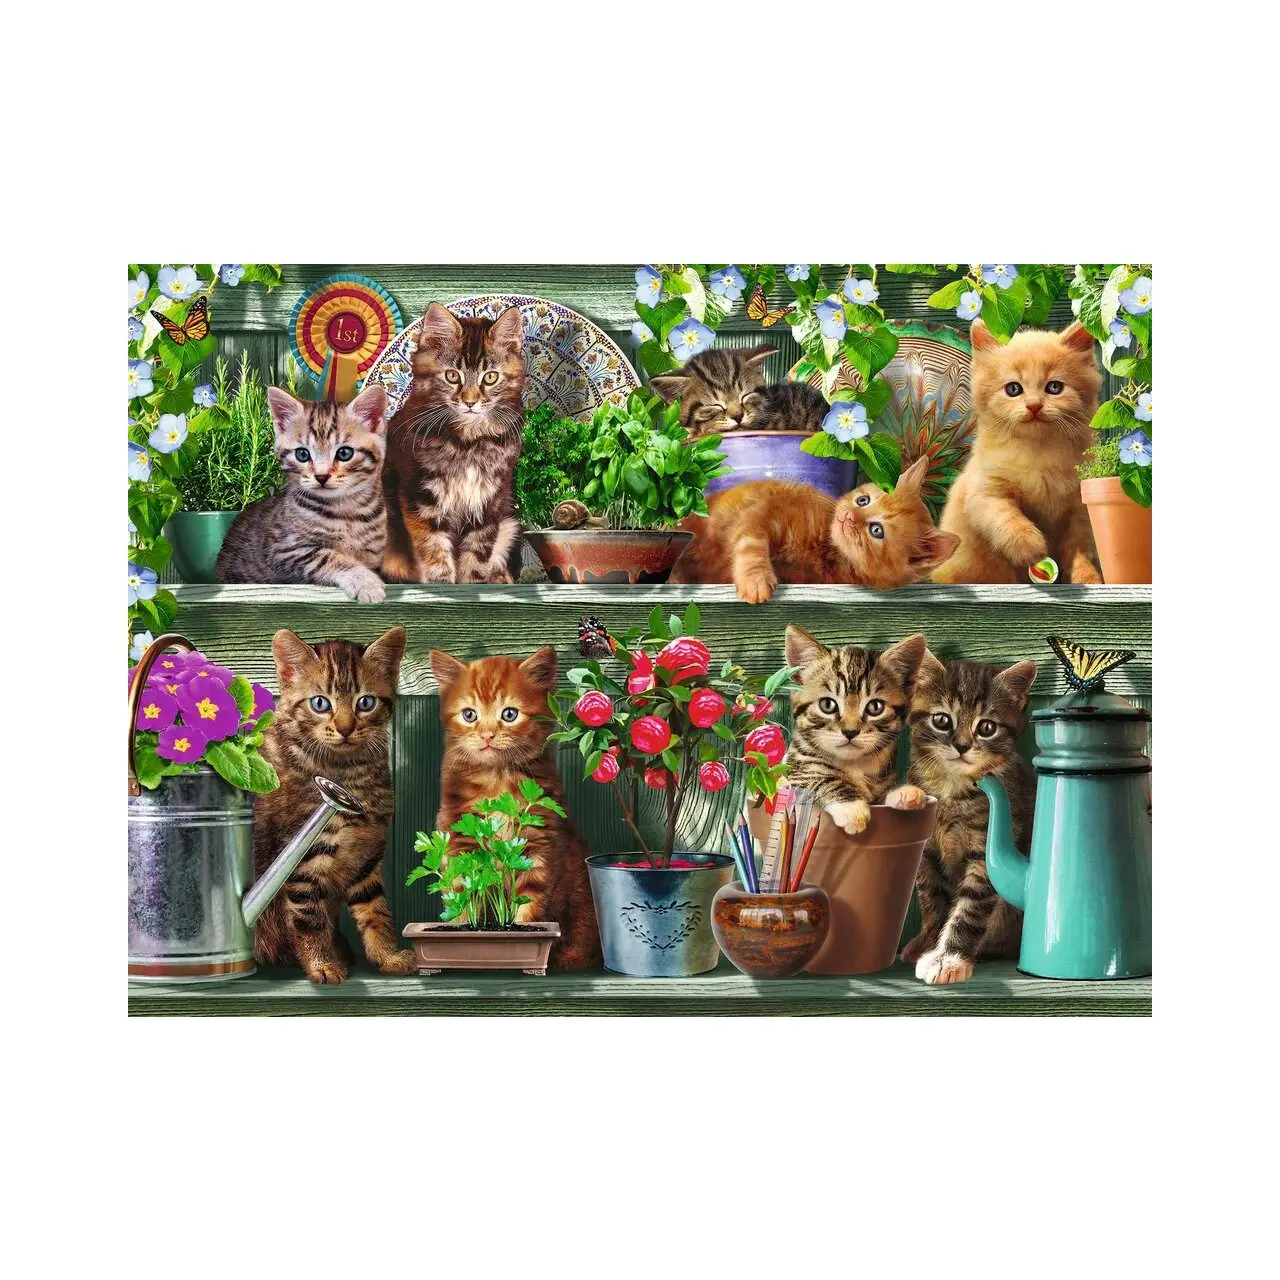 Puzzle Cats on the Shelf 500 Teile